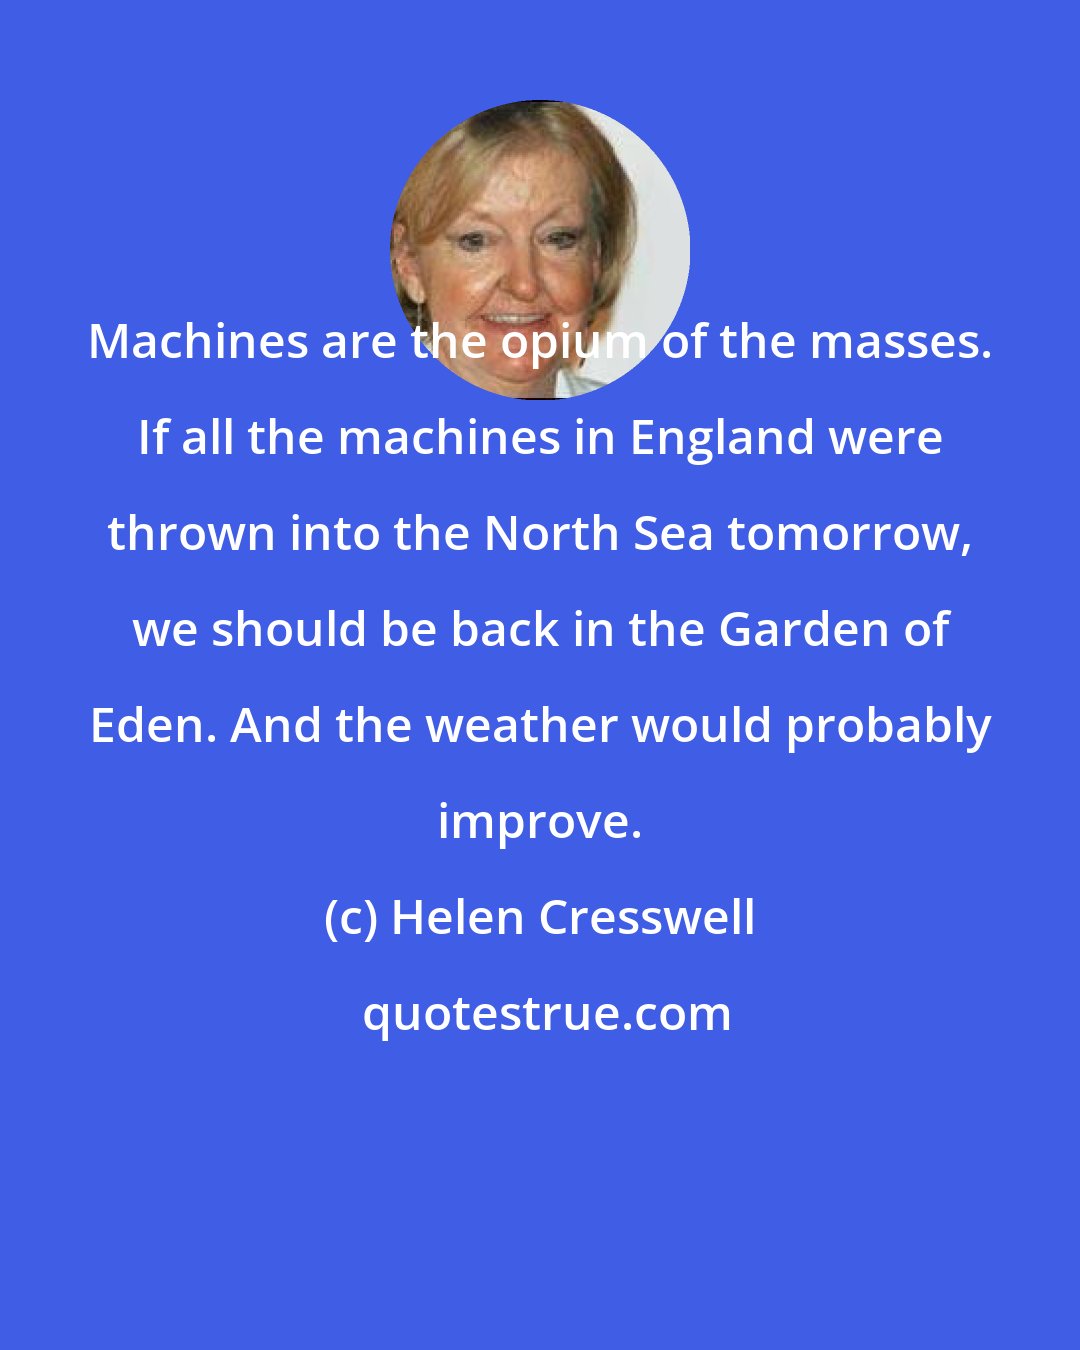 Helen Cresswell: Machines are the opium of the masses. If all the machines in England were thrown into the North Sea tomorrow, we should be back in the Garden of Eden. And the weather would probably improve.